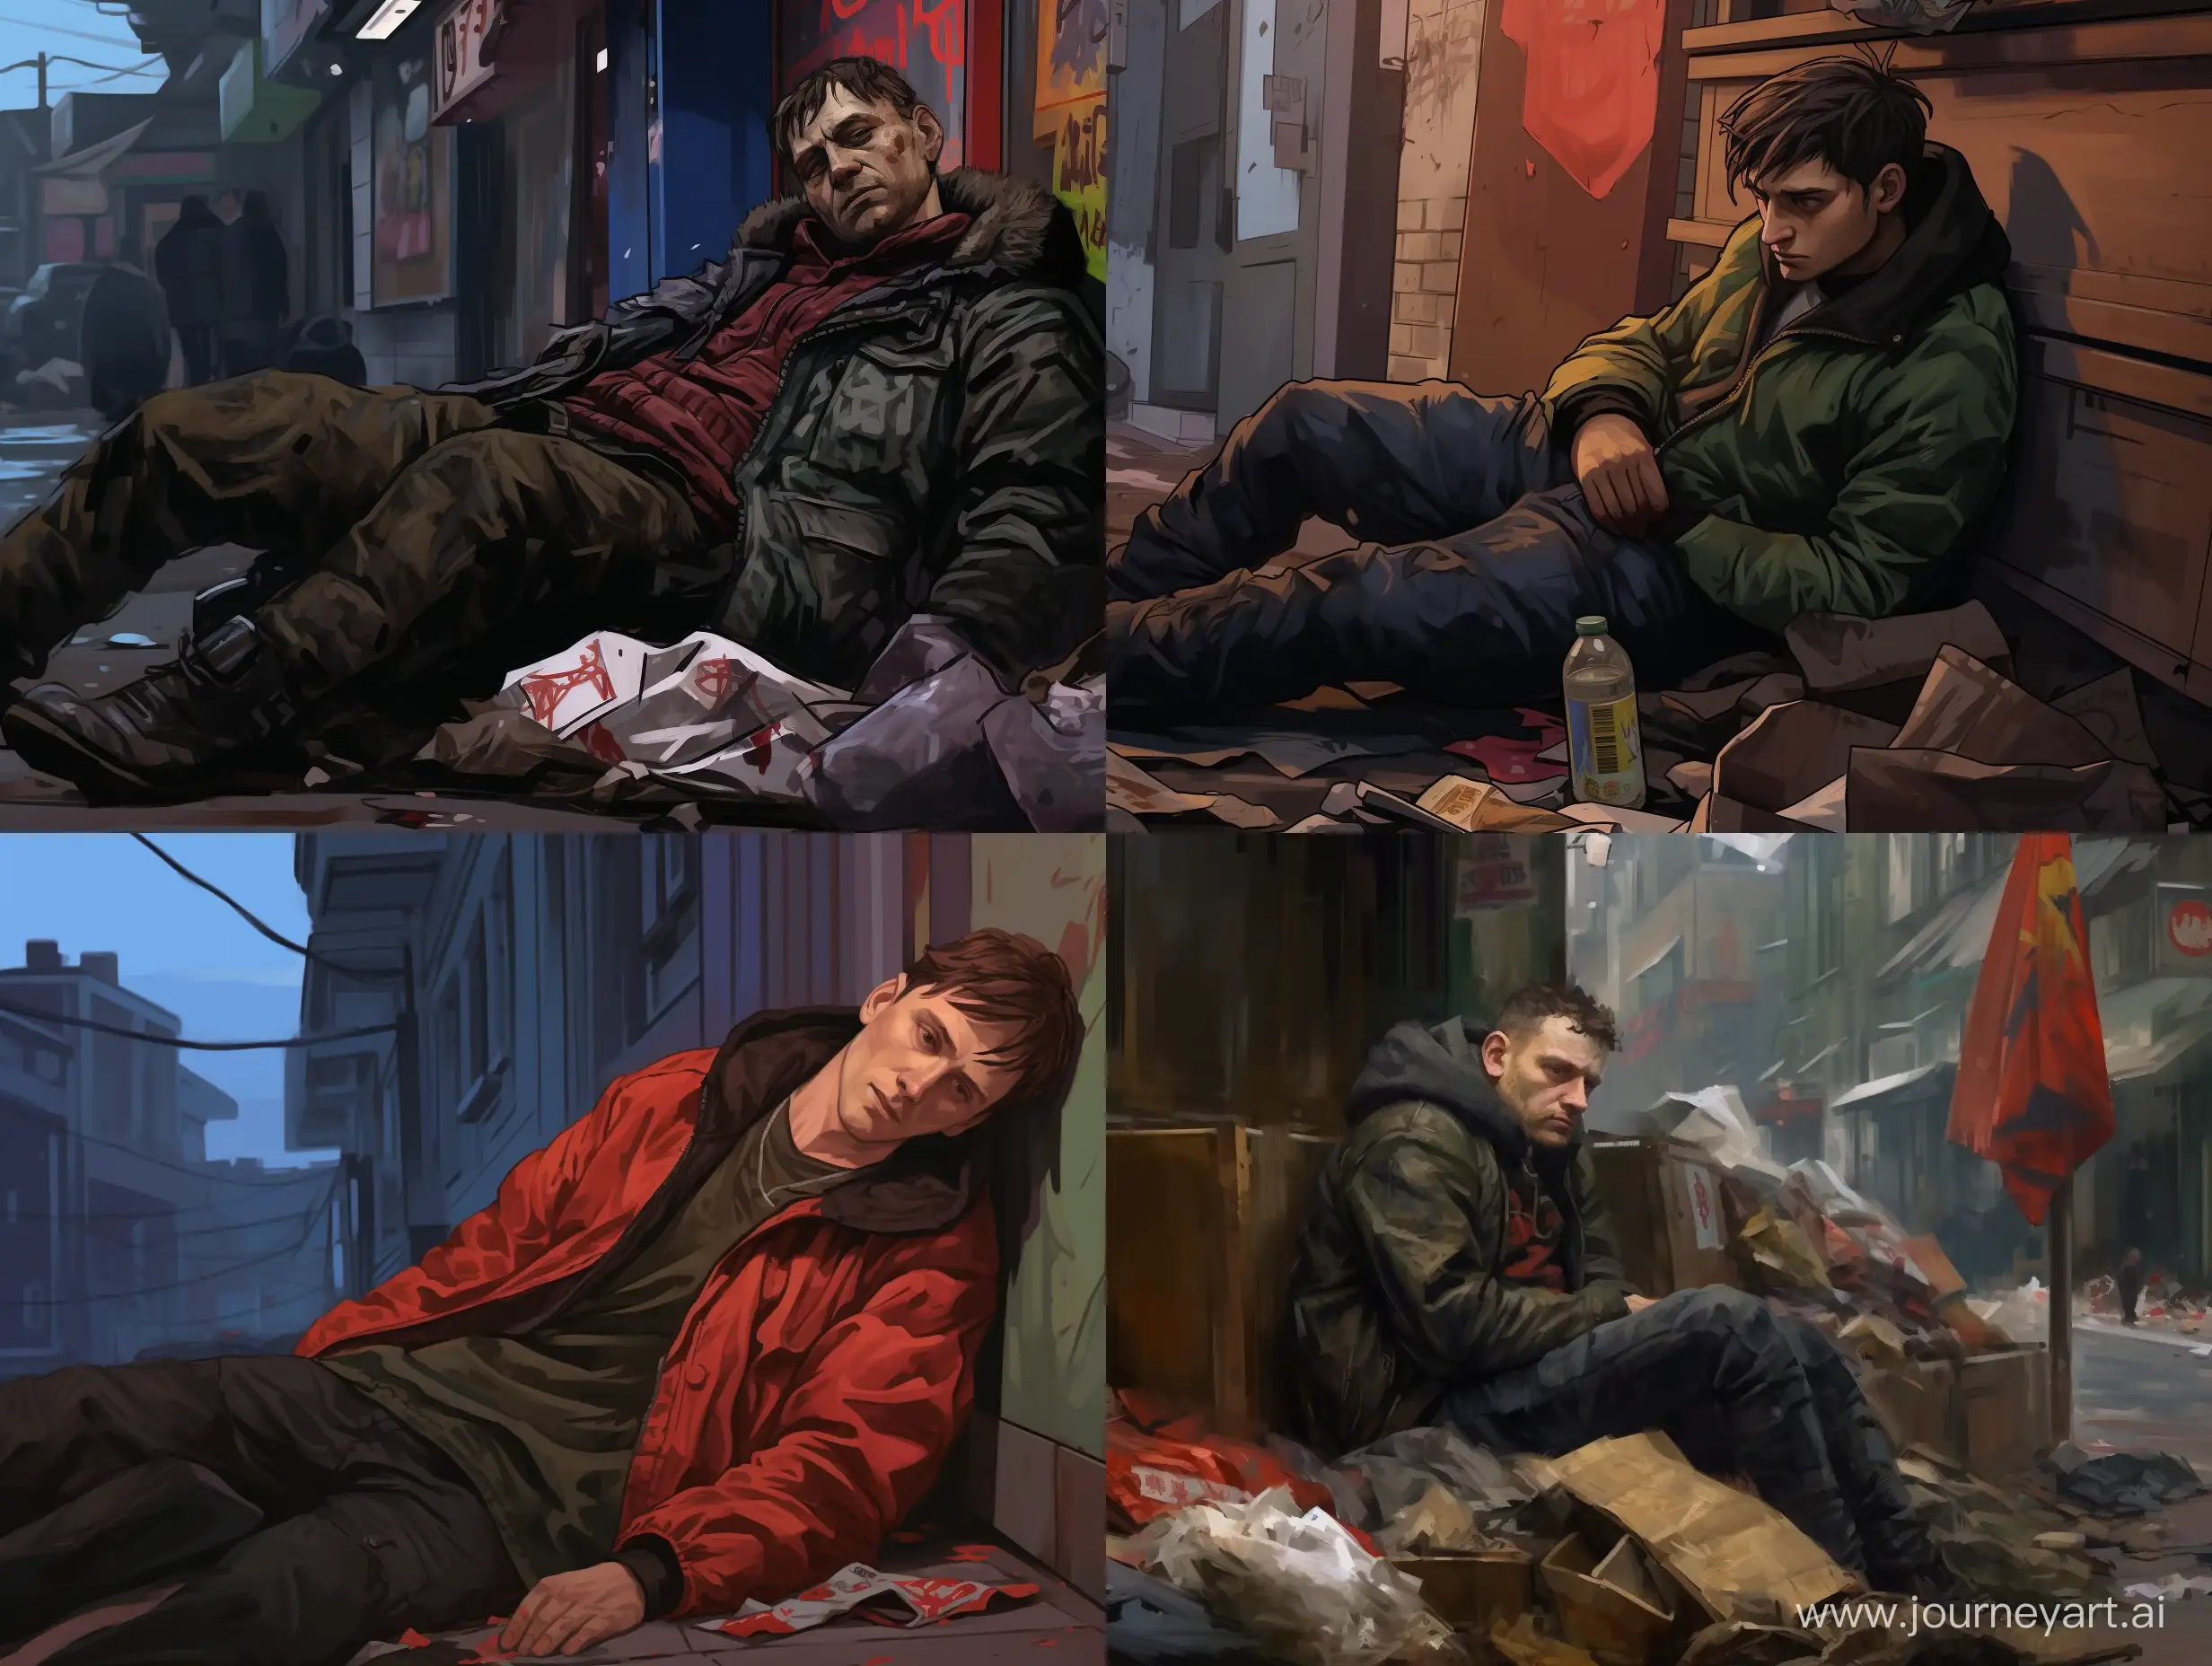 Unexpected-Encounter-Russian-Gopnik-and-Homeless-Individuals